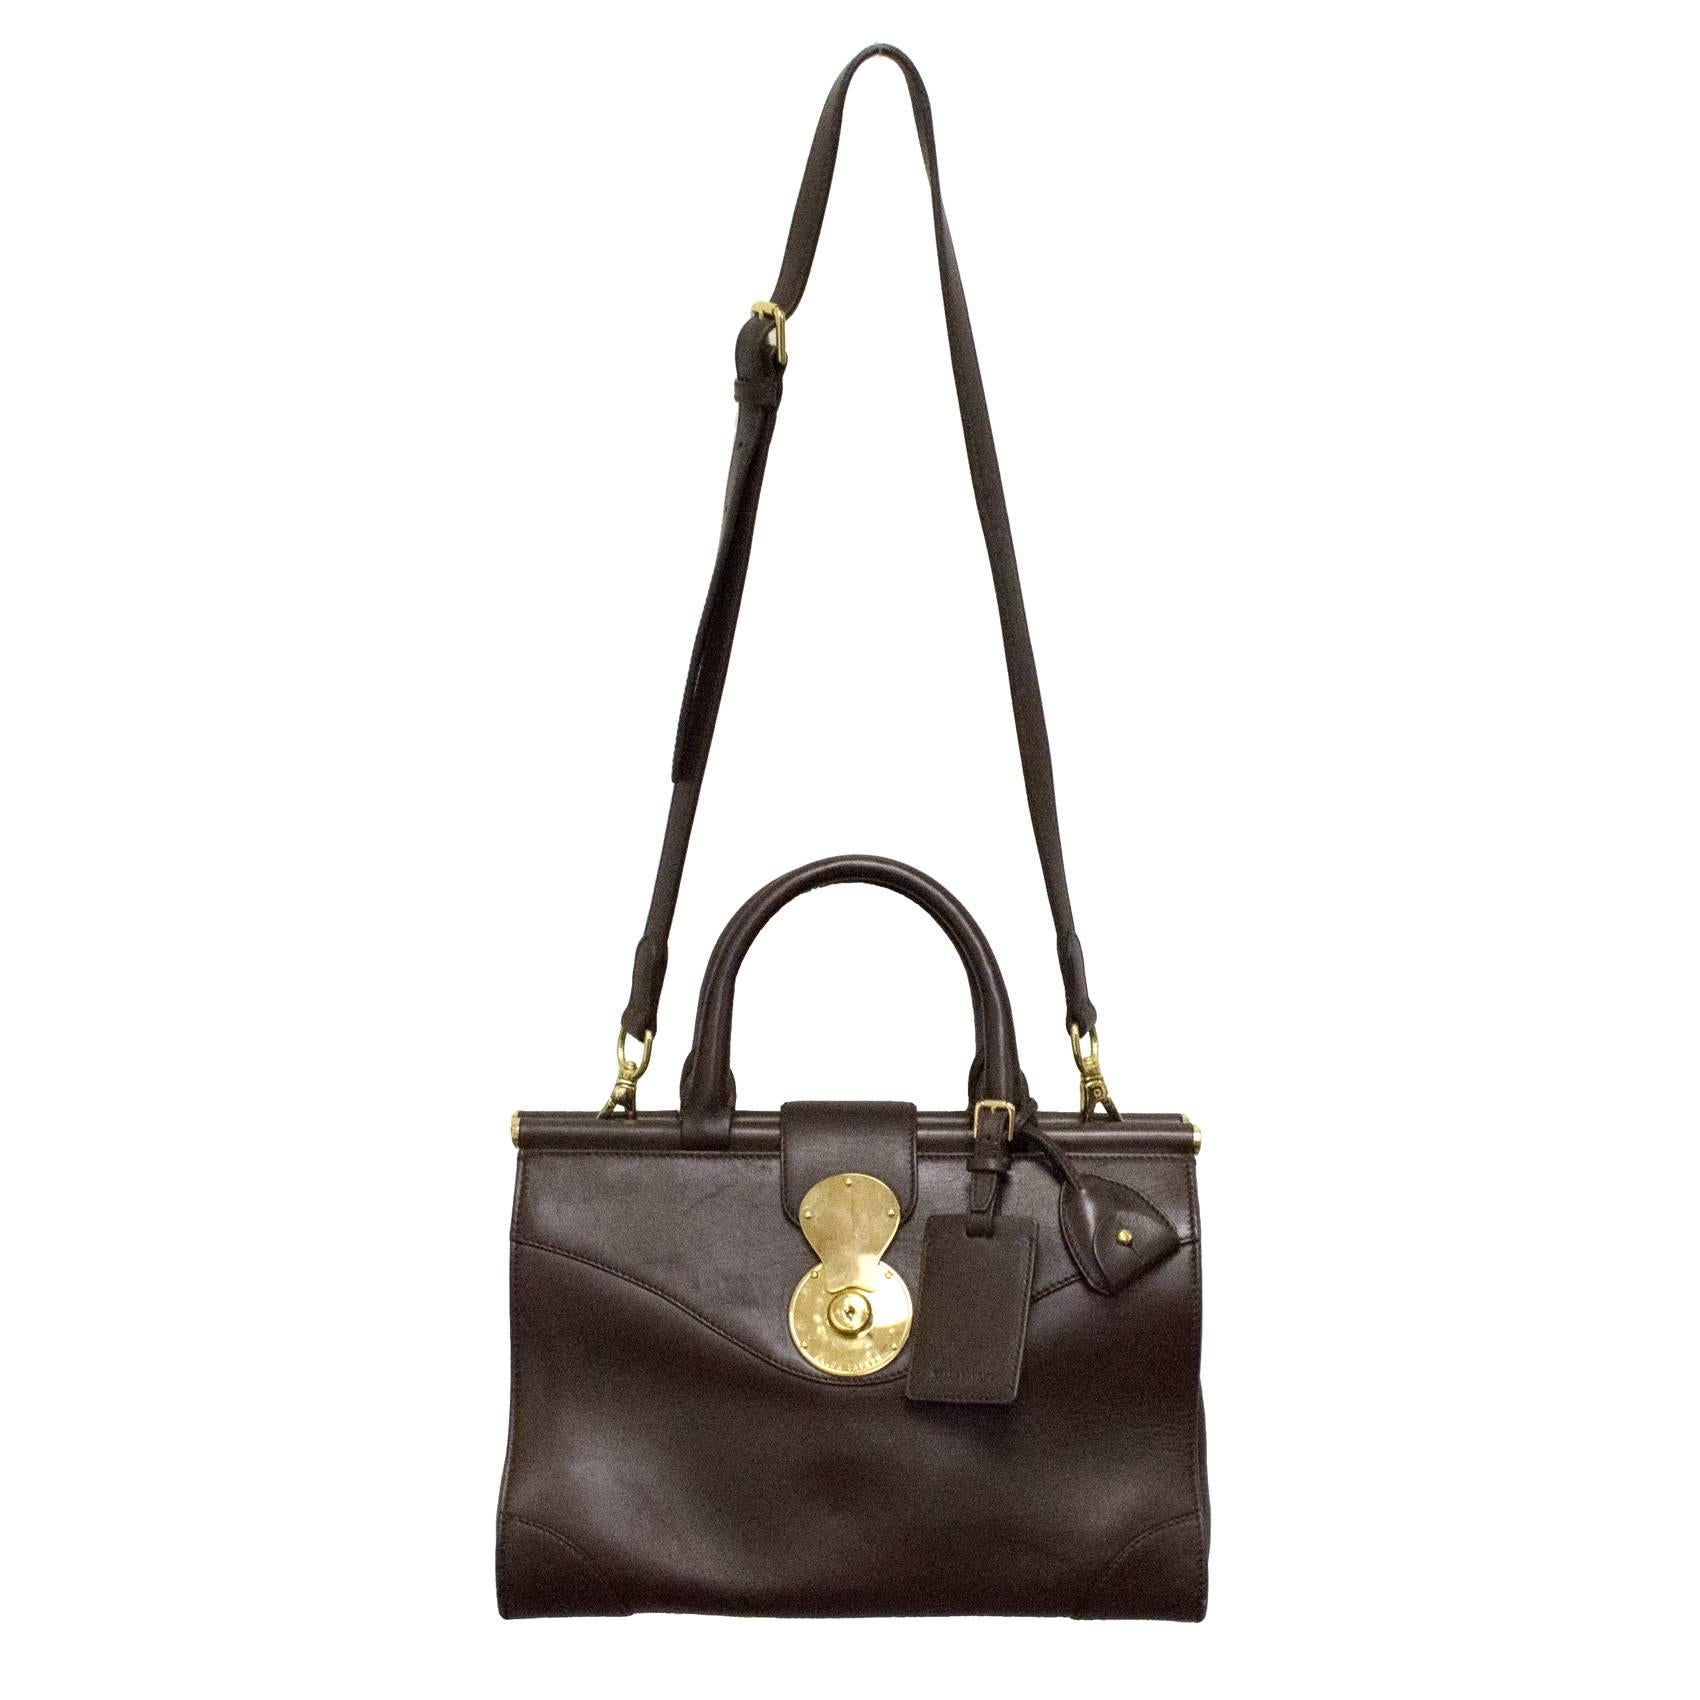 Ralph Lauren brown classic Carlyle Tote made from smooth calfskin with gold finishings and clip fastening. With detachable long shoulder strap, label tag and key pouch. 

Please note there is a small mark on the right side of the bag (please see